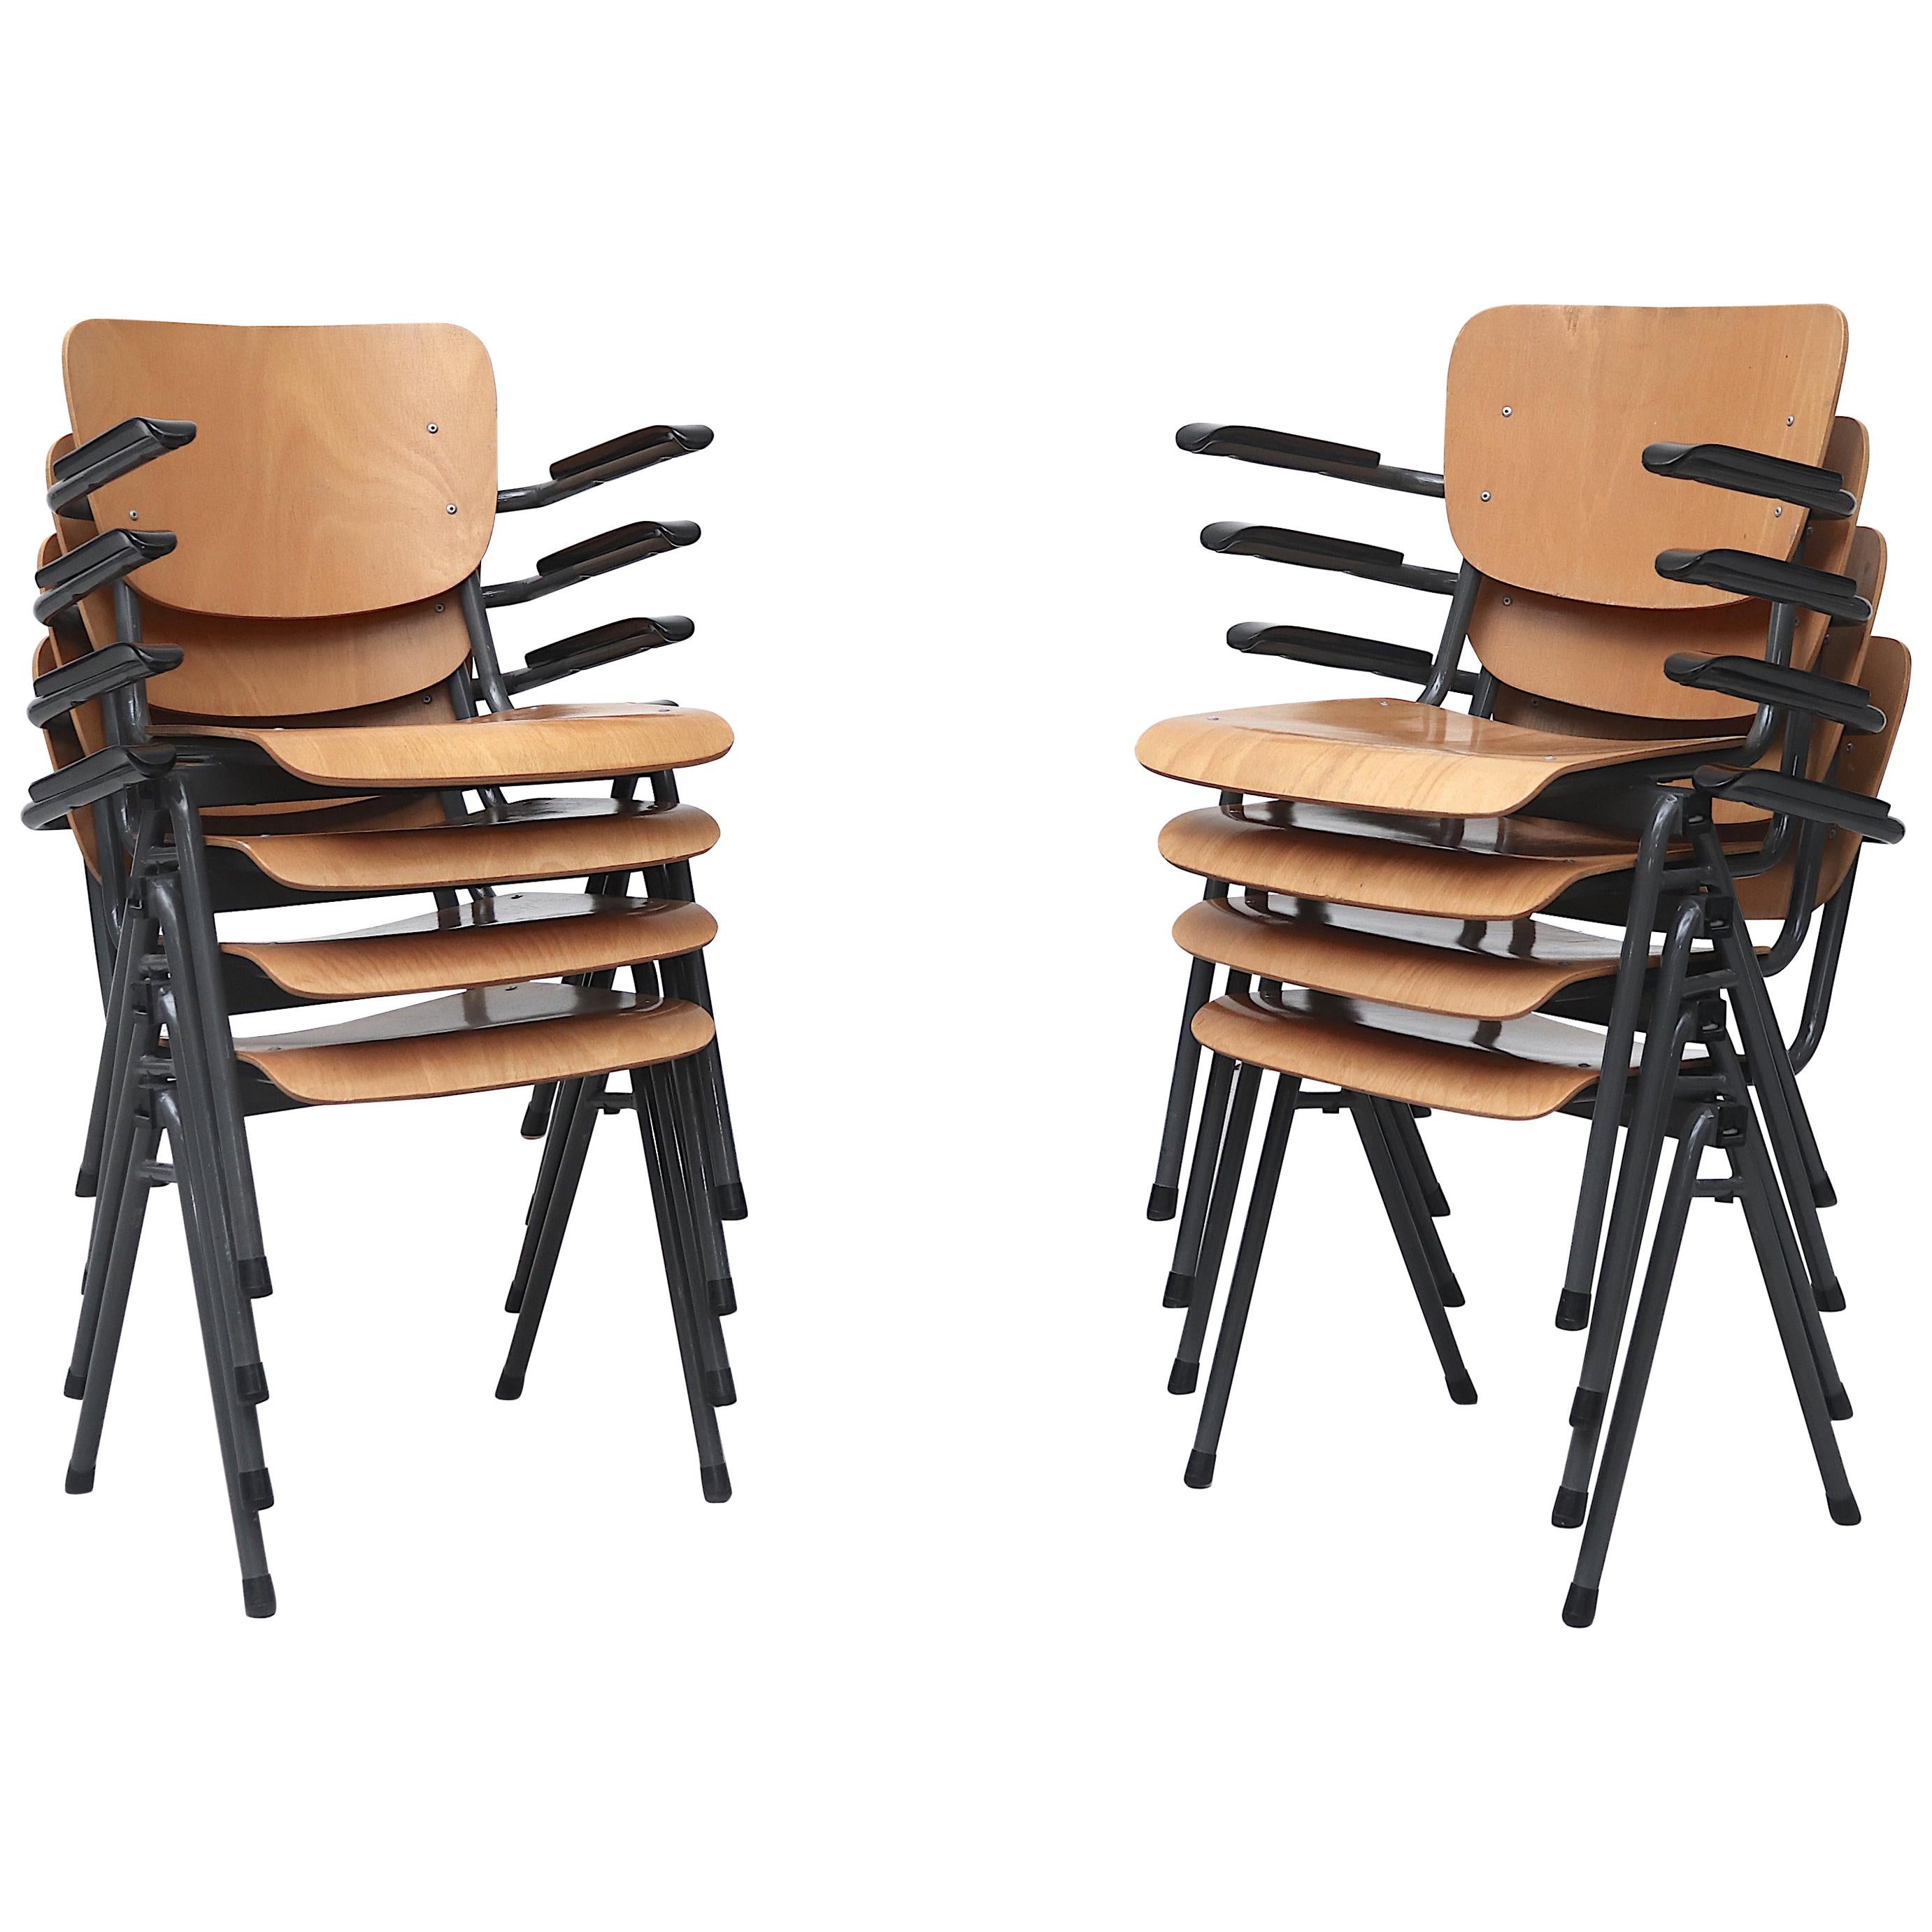 Set of 4 Gispen Style Plywood Stacking School Chairs with Arm Rests For Sale